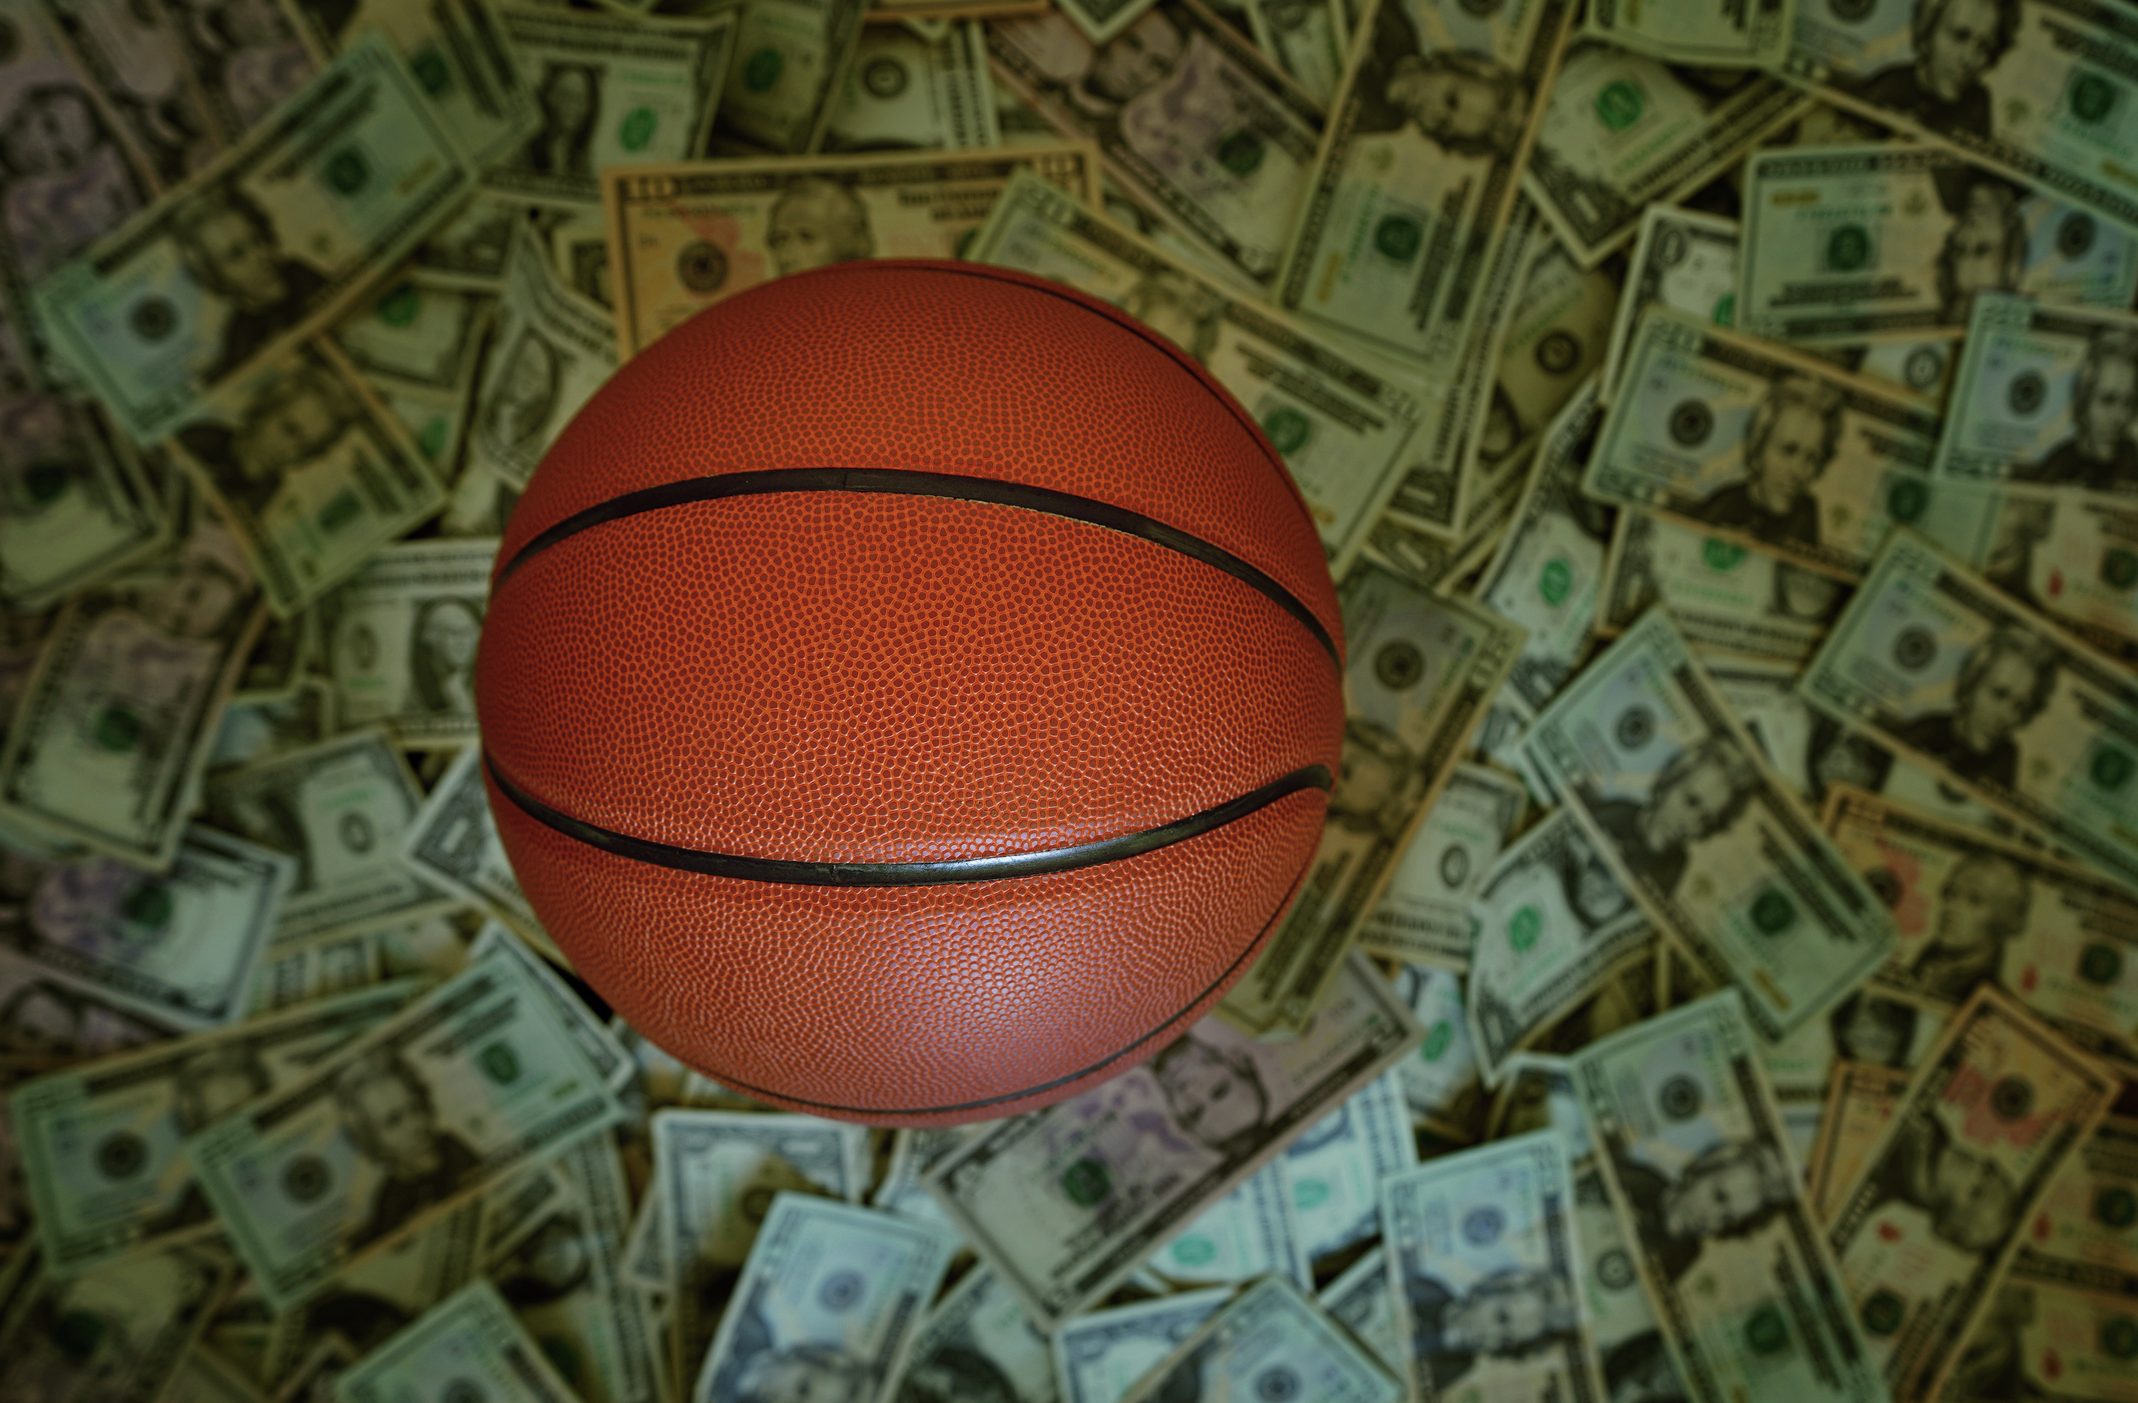 Paying college athletes more money, Paul Hodowanic and more NIL discussion!